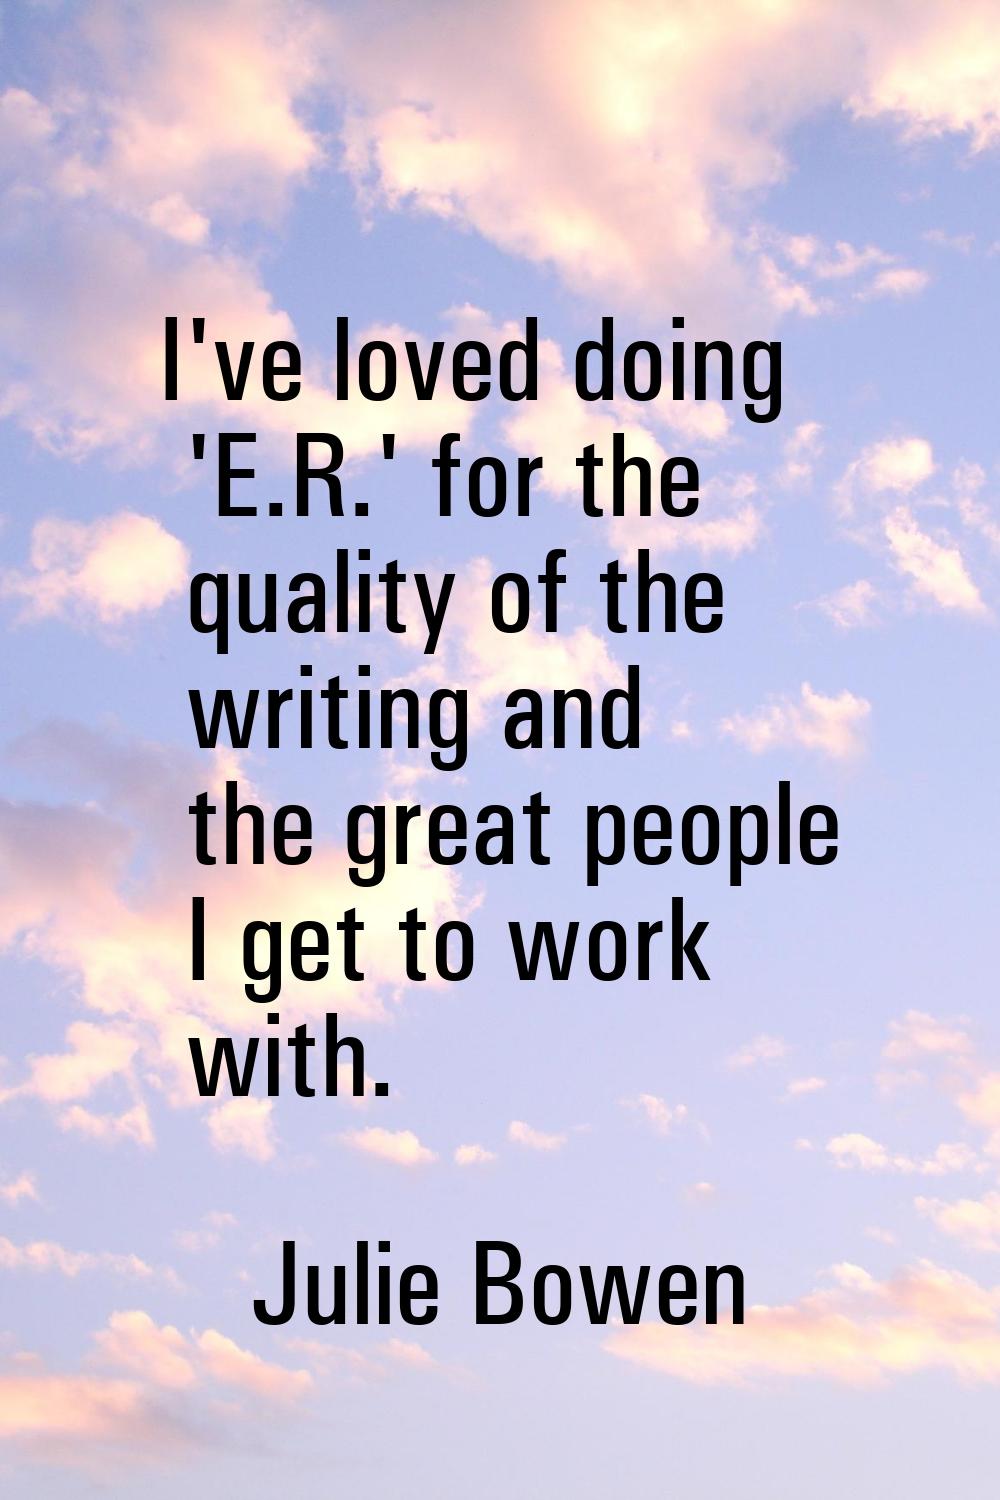 I've loved doing 'E.R.' for the quality of the writing and the great people I get to work with.